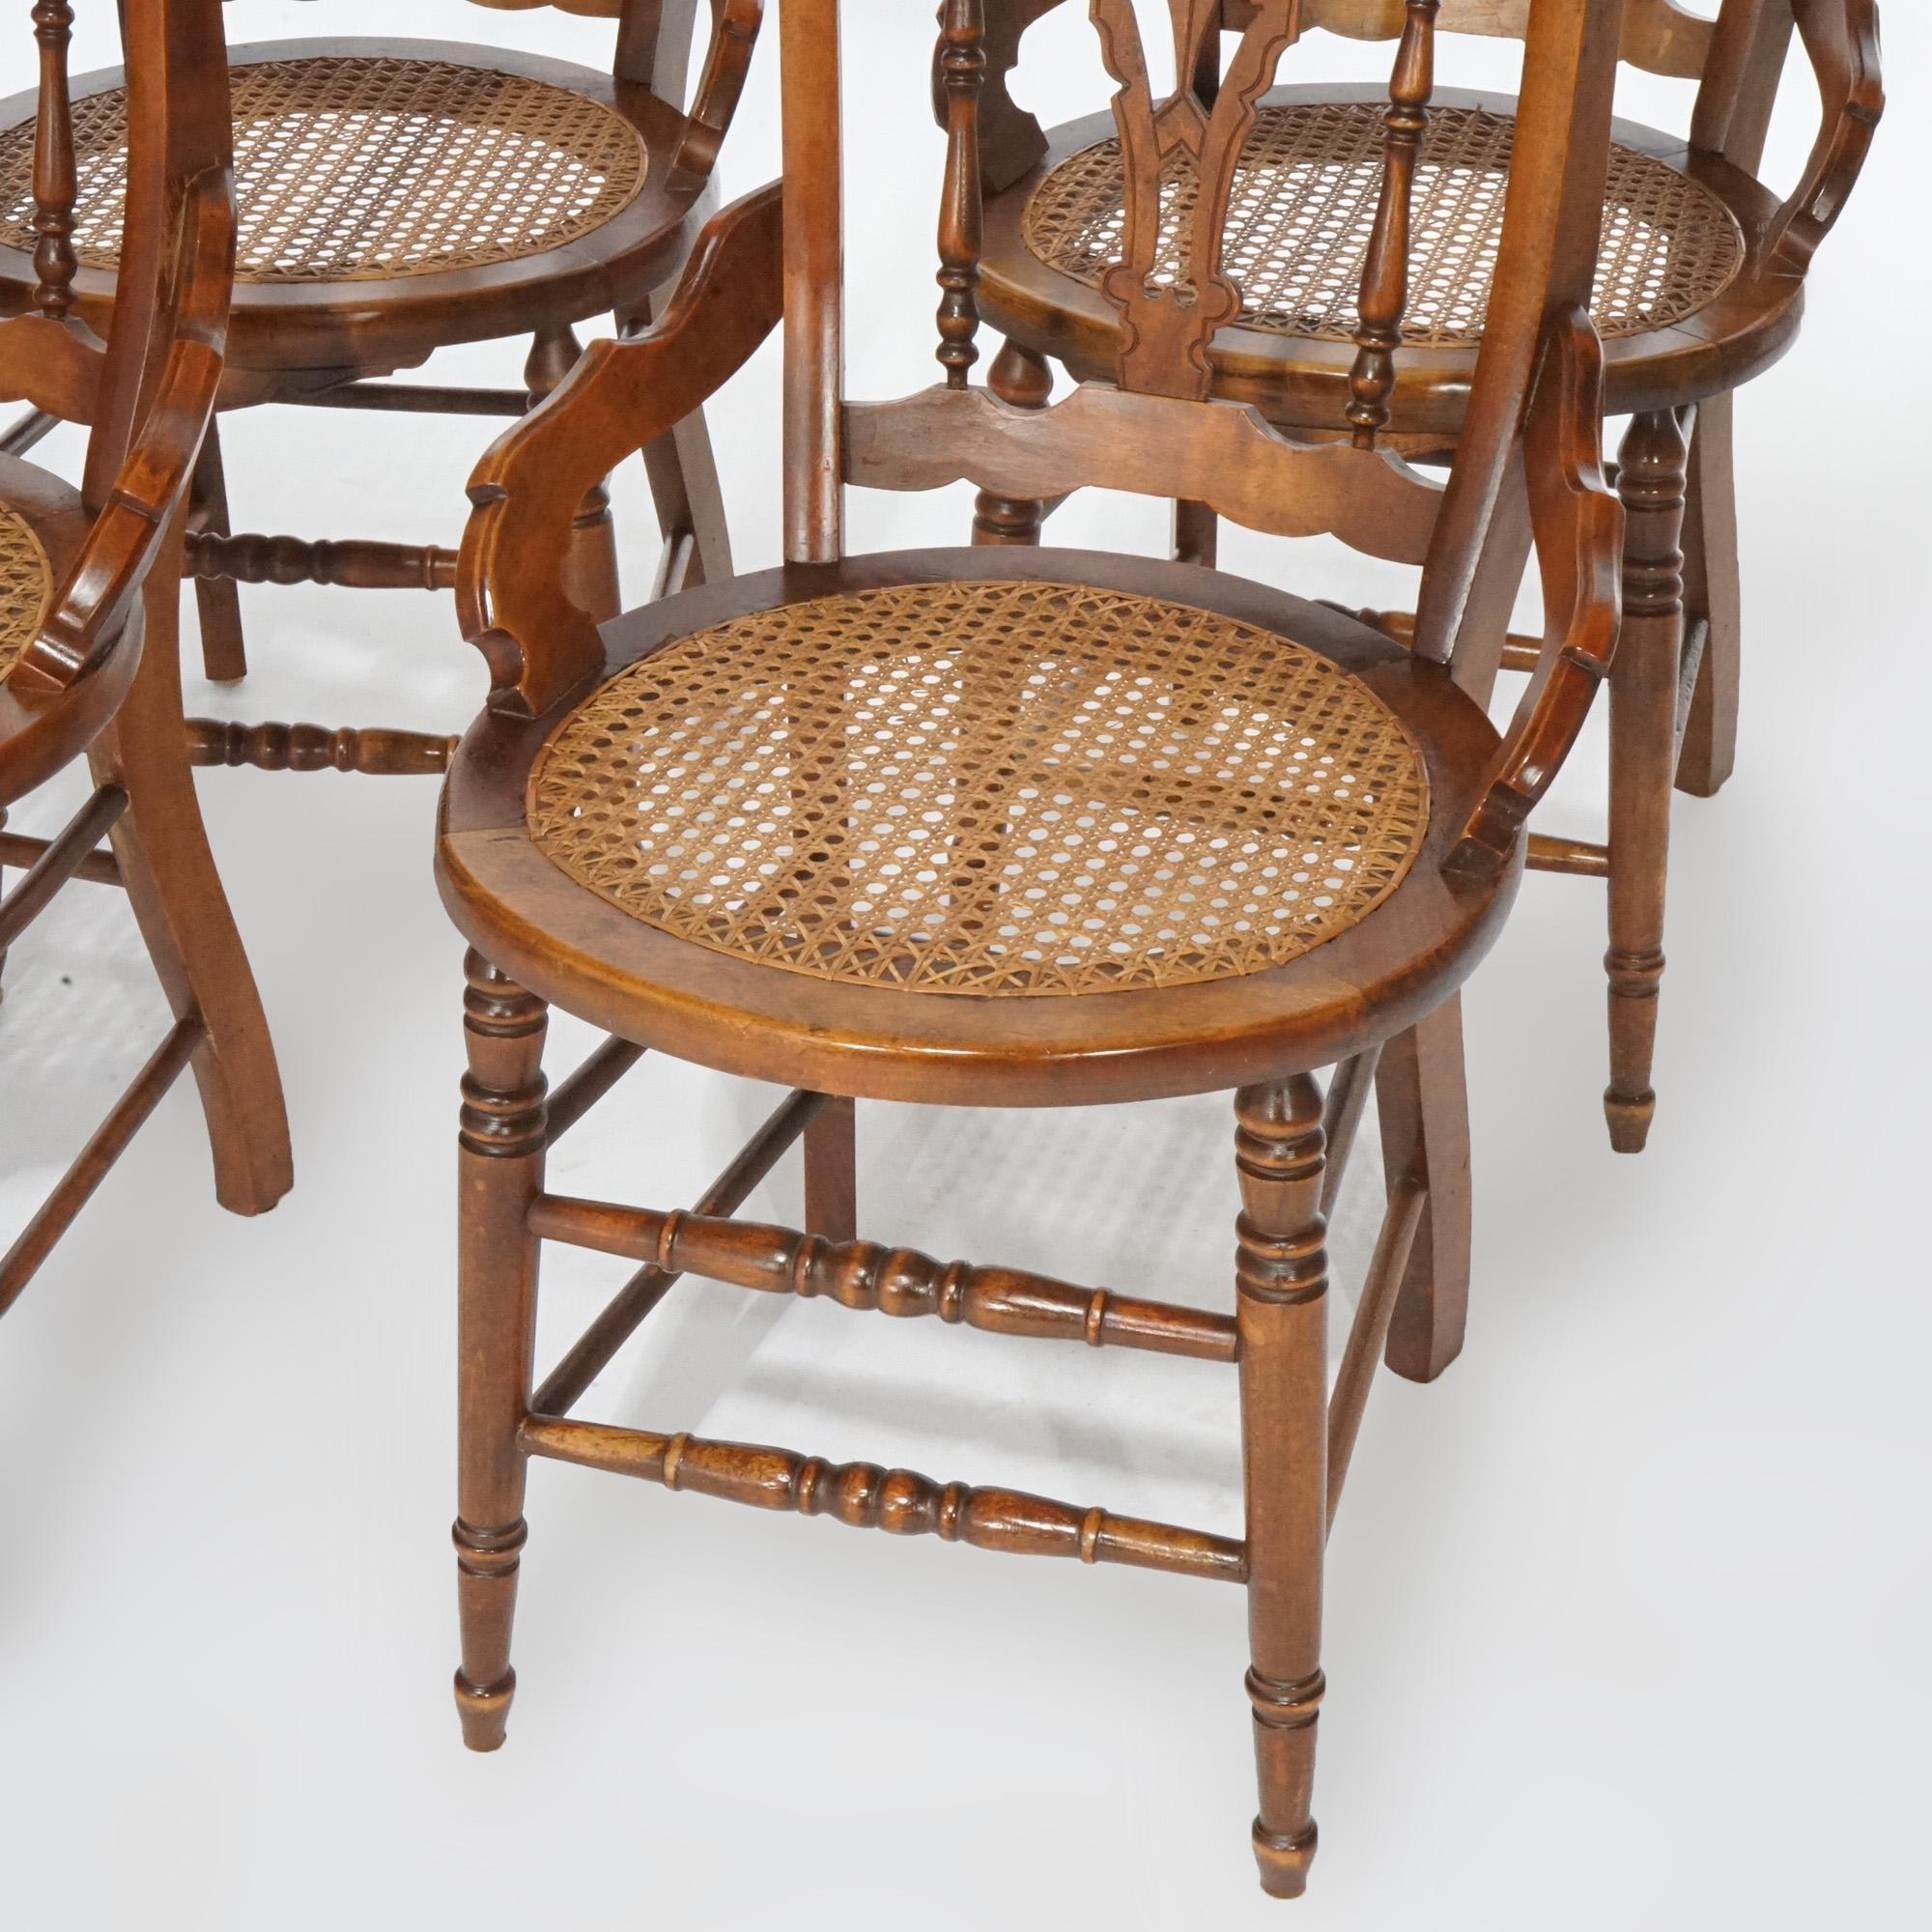 Antique Set of Four Victorian Walnut, Burl & Cane Seat Dining Chairs, Circa 1890 For Sale 1